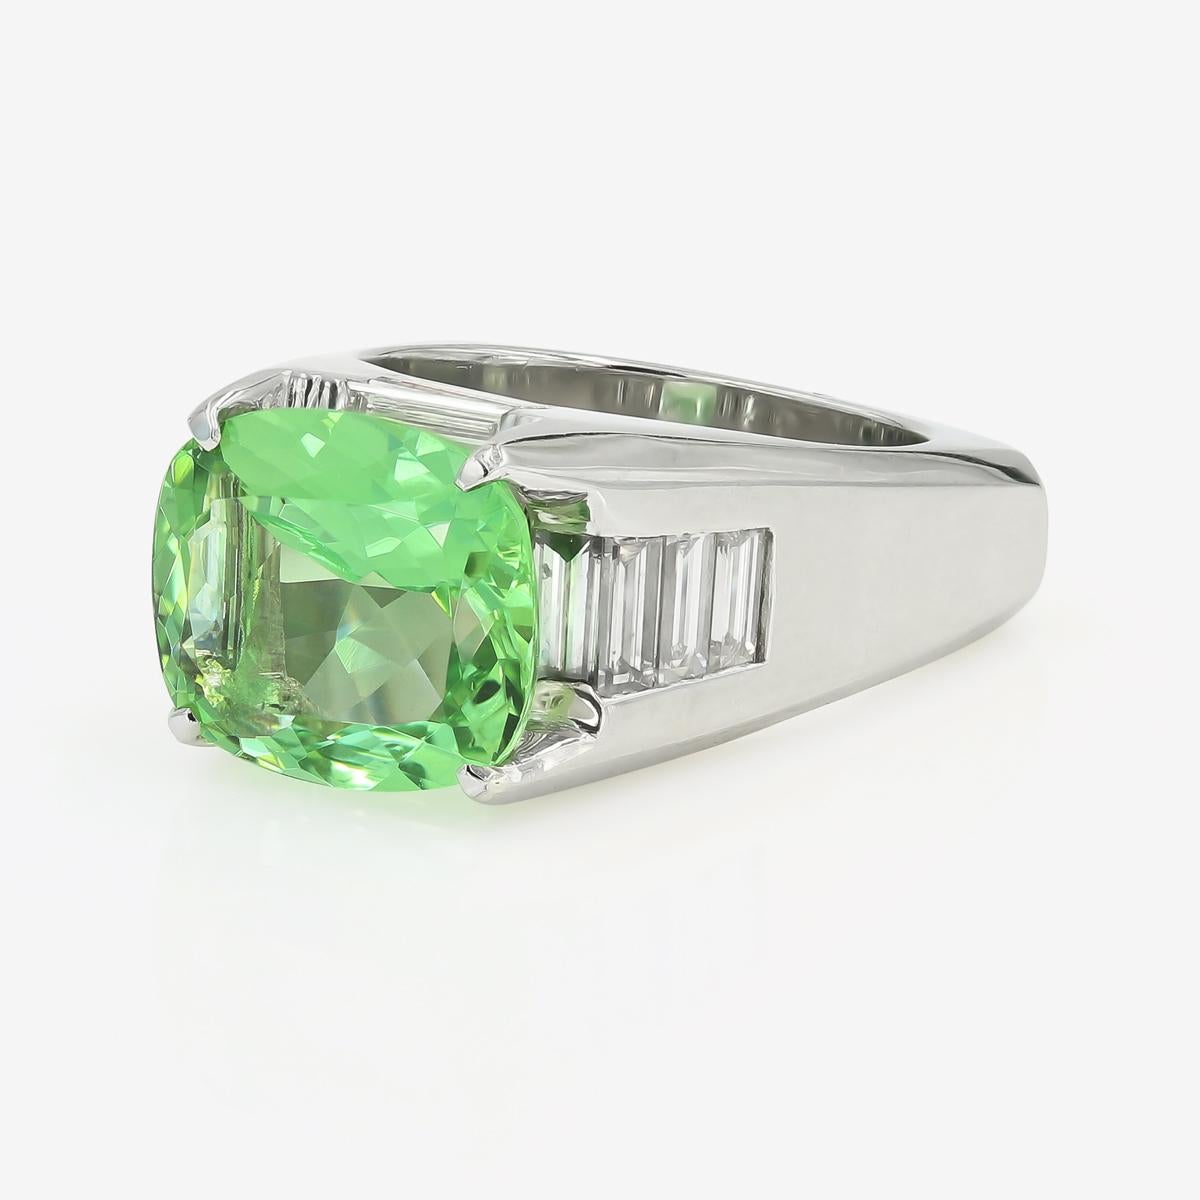 This exquisite ring has a natural green beryl cushion cut center=5.22cts. It also contains 12 straight baguette diamonds weighing approximately 1.30cts. t.w. (The baguettes are G in color and VS in clarity) The entire ring is made in